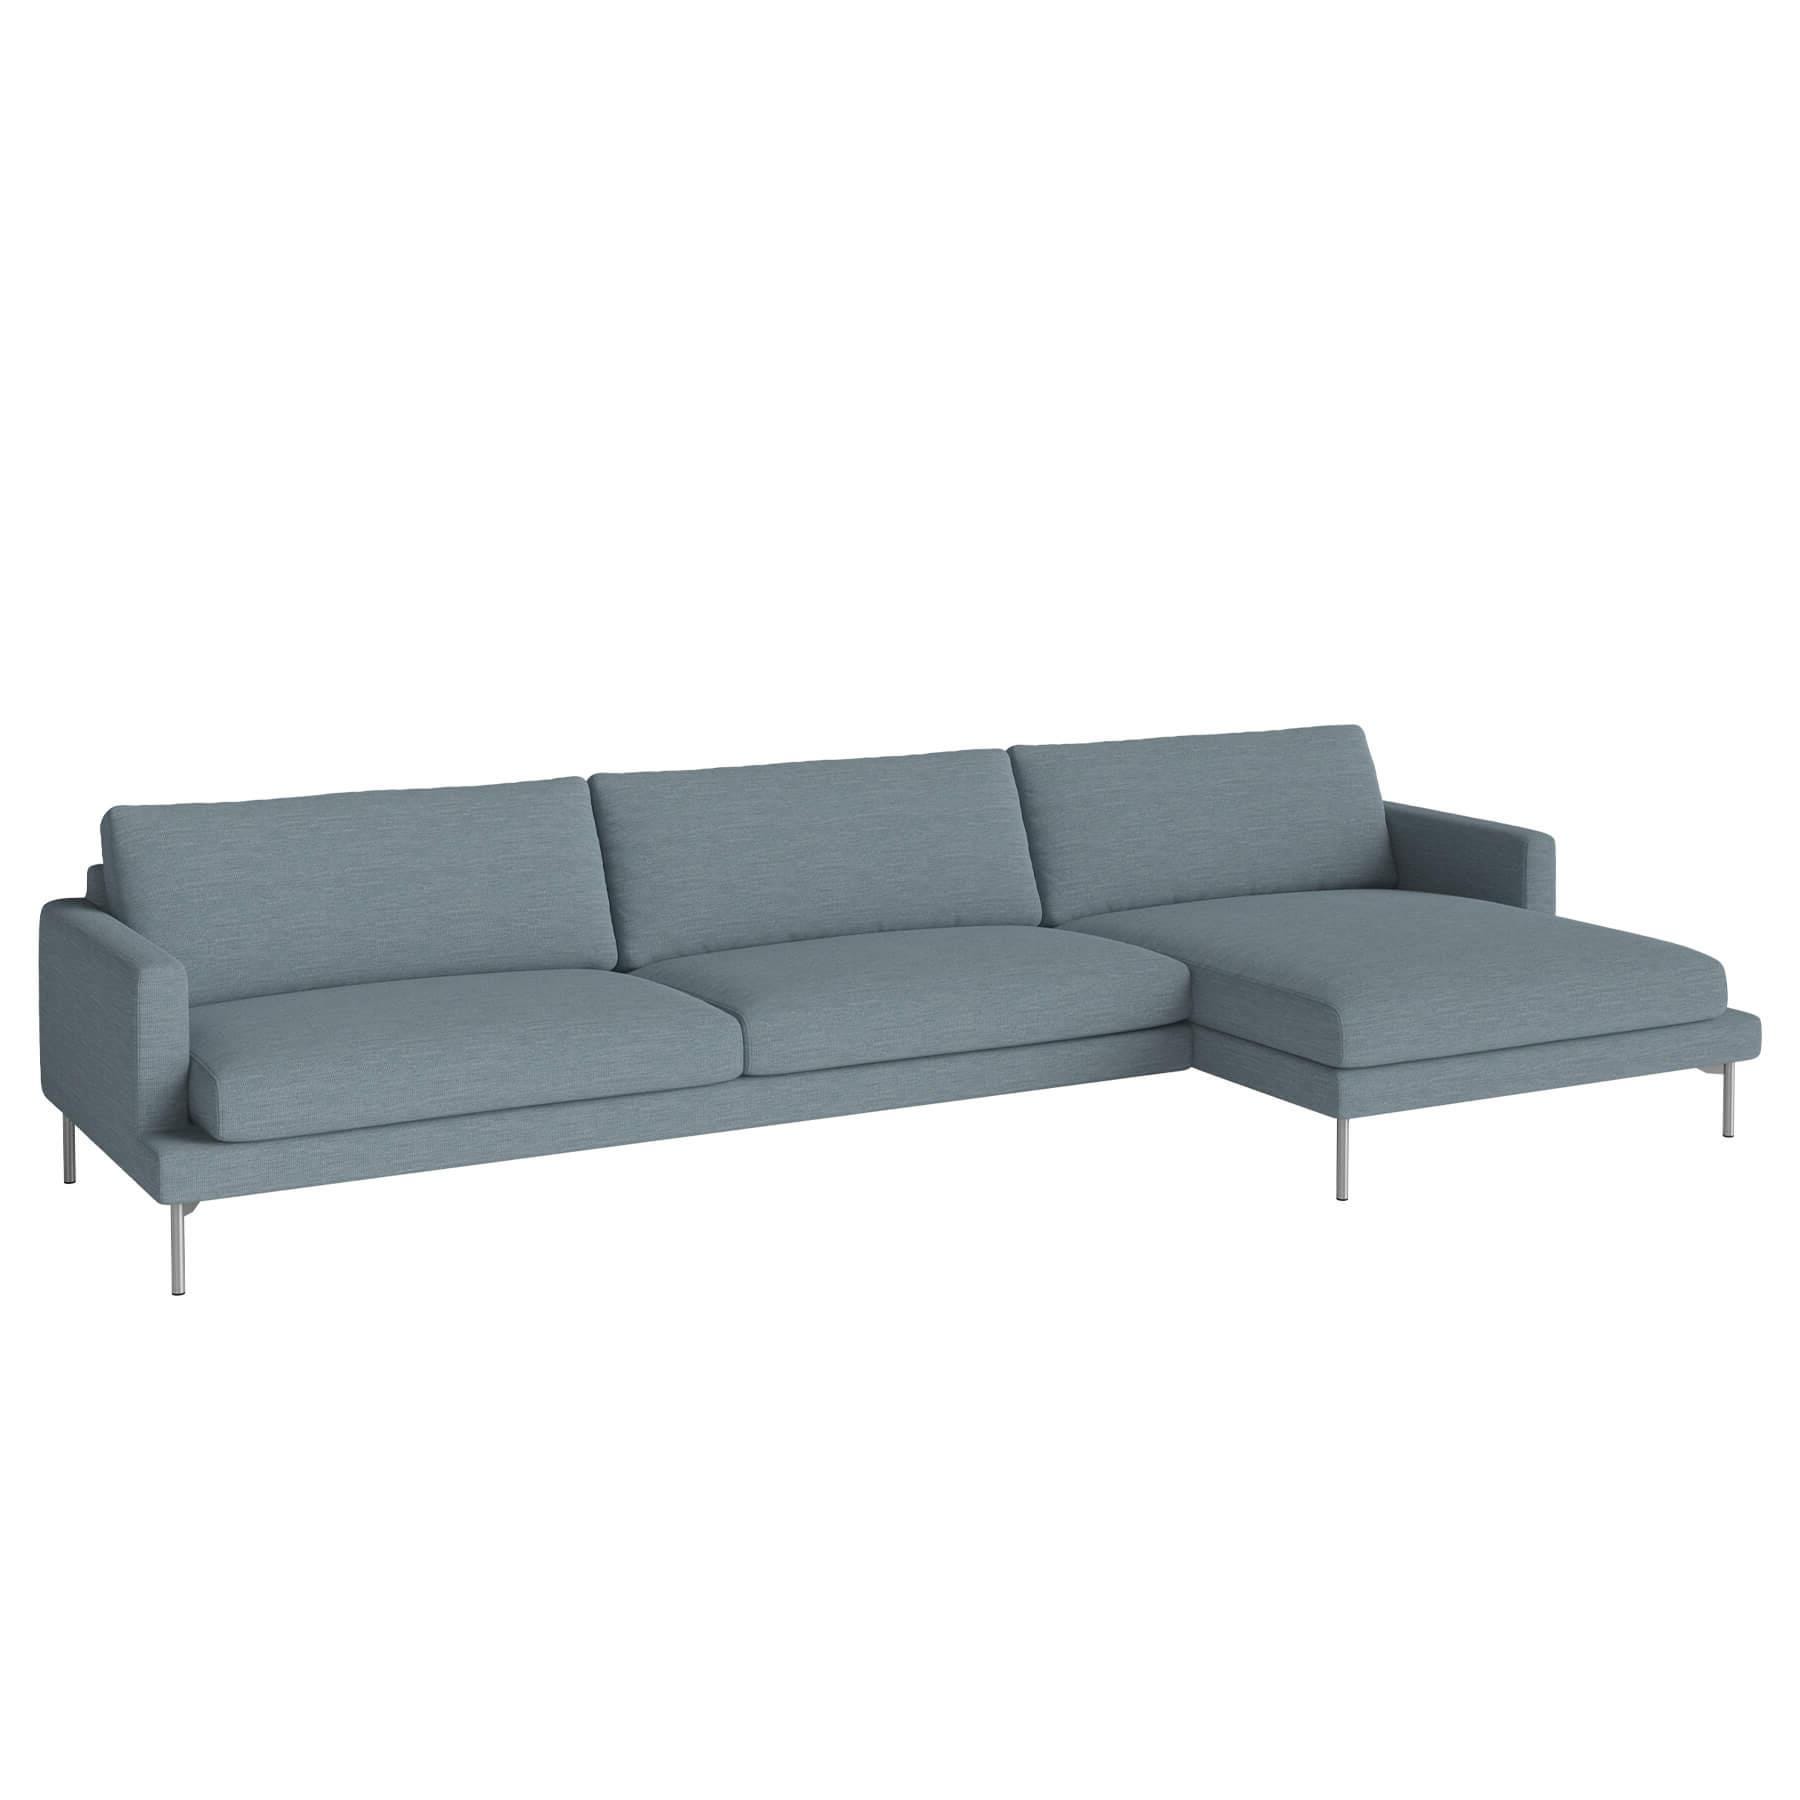 Bolia Veneda Sofa 45 Seater Sofa With Chaise Longue Brushed Steel Laine Light Blue Right Blue Designer Furniture From Holloways Of Ludlow